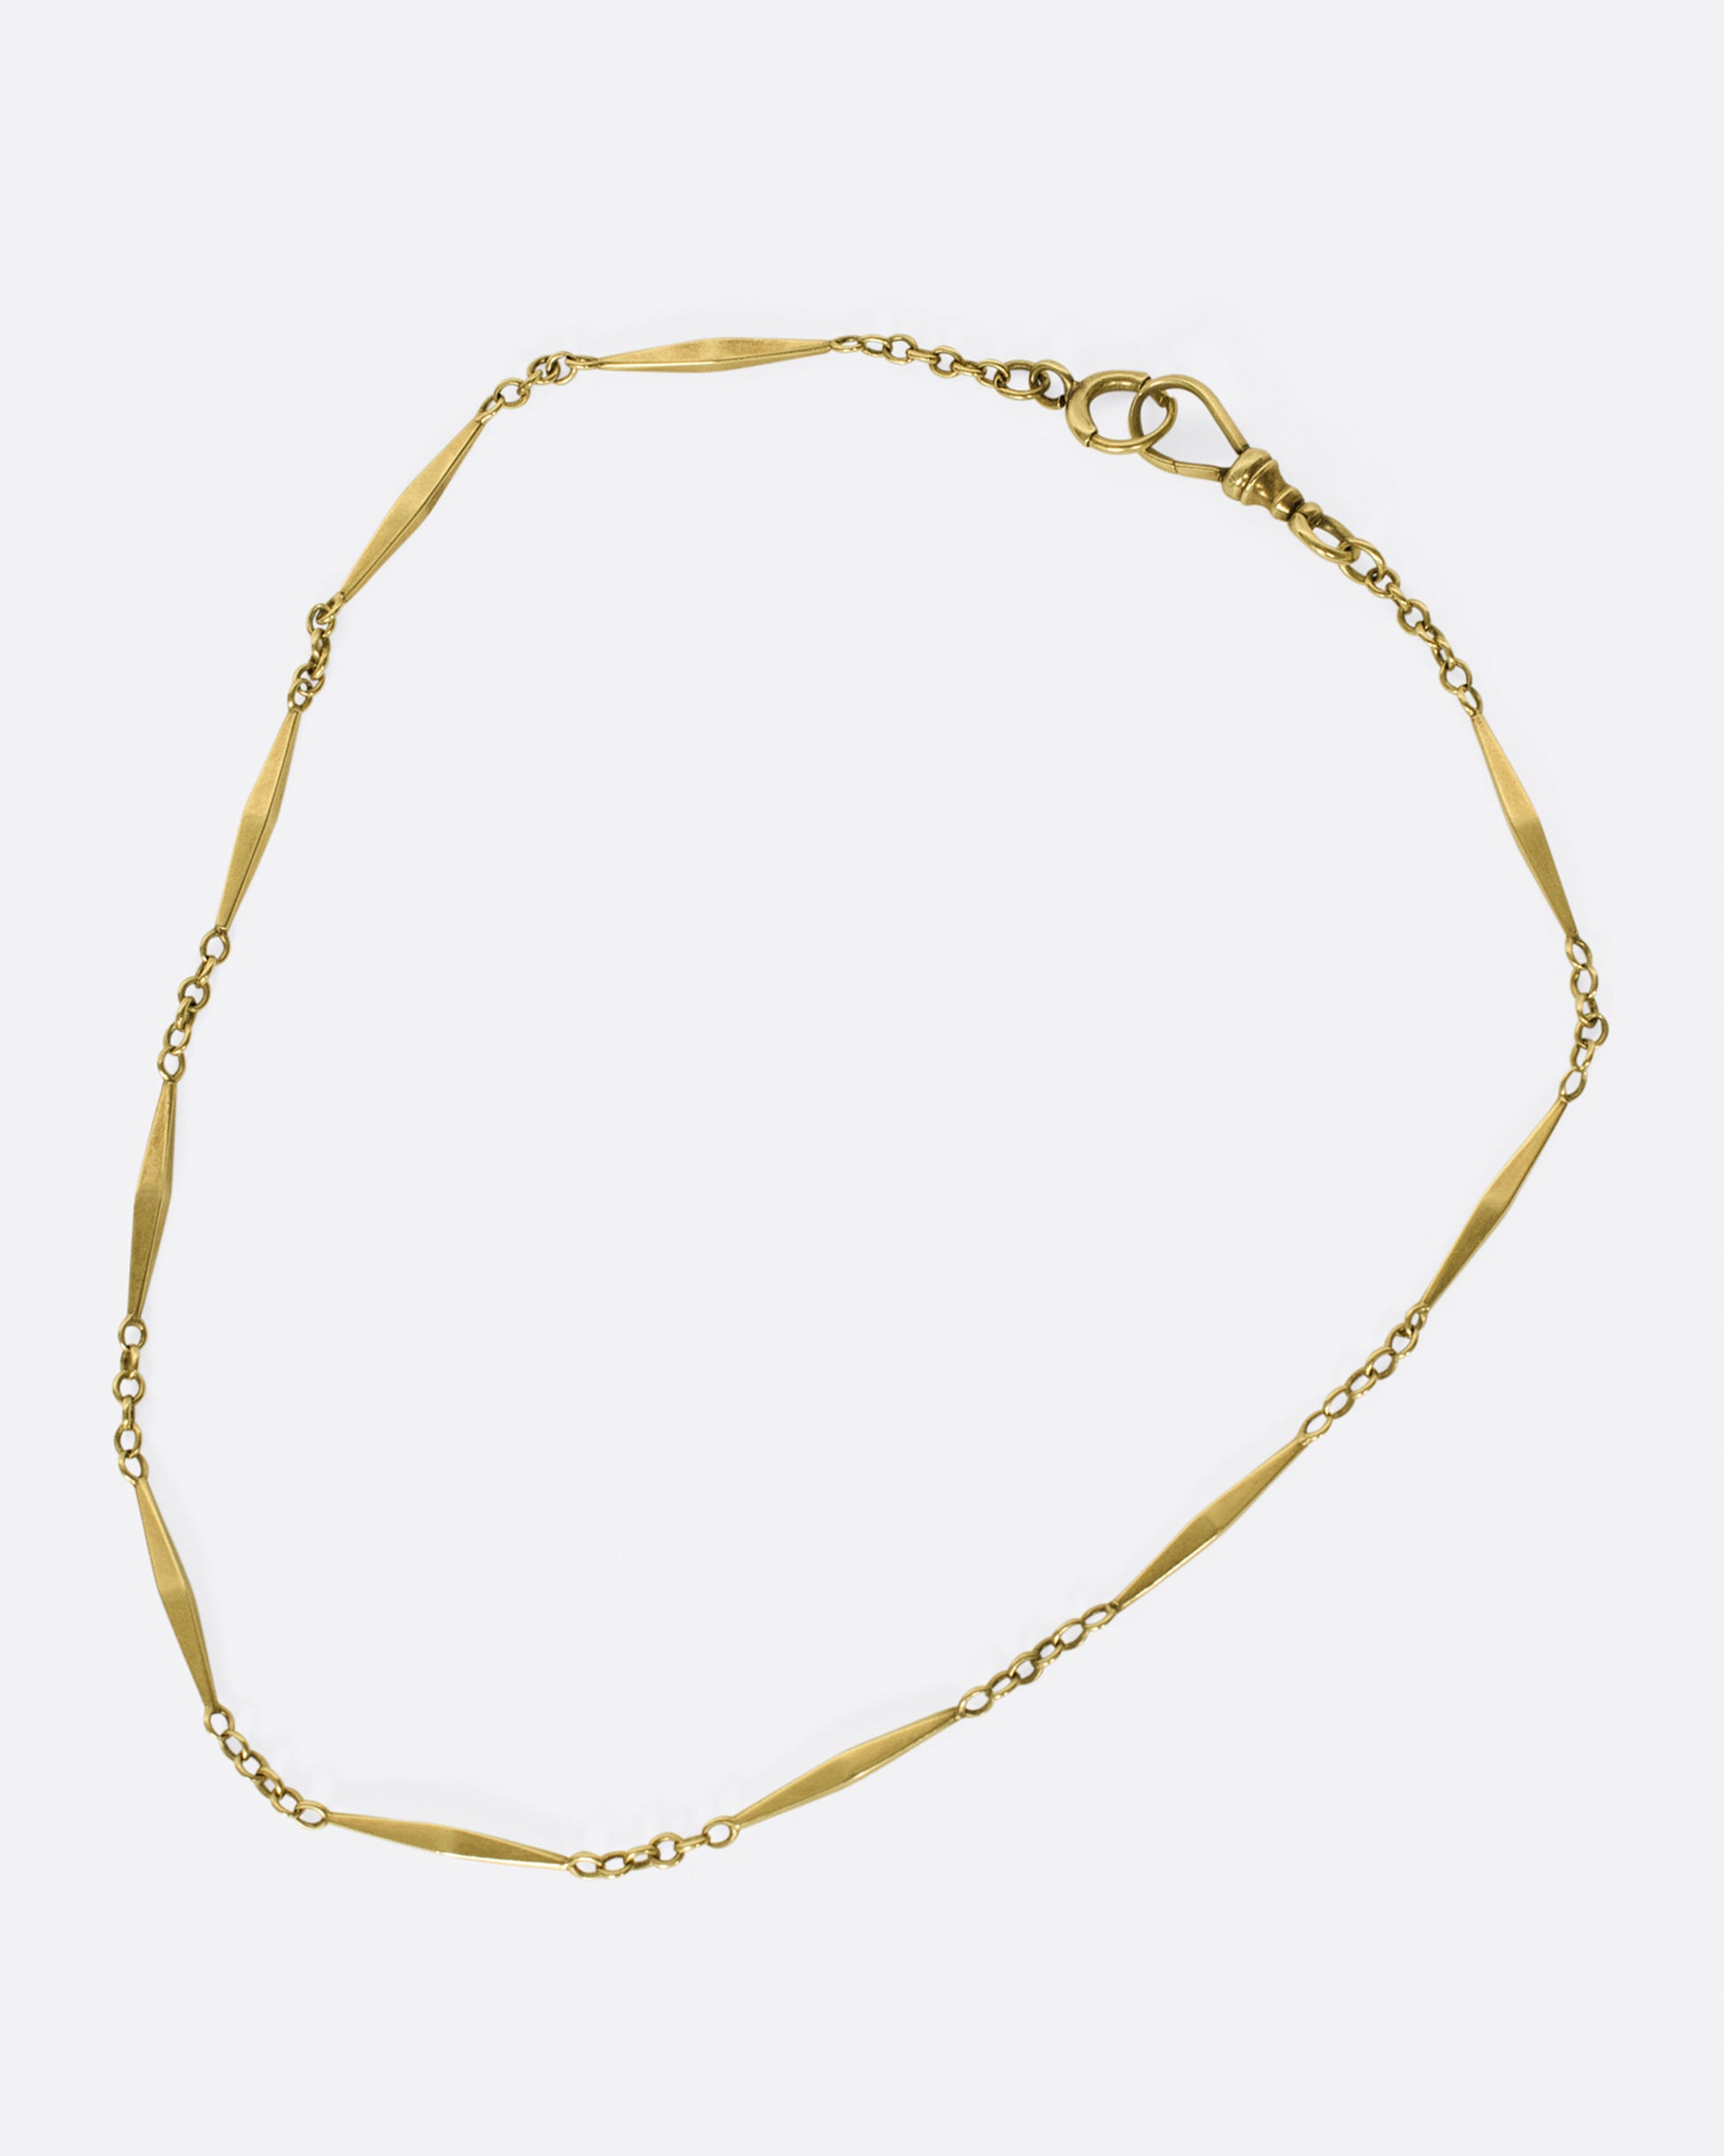 This necklace is choker length and comprised of alternating handcrafted octahedron links and cable link stations; the clasp is perfect for attaching your favorite charms.